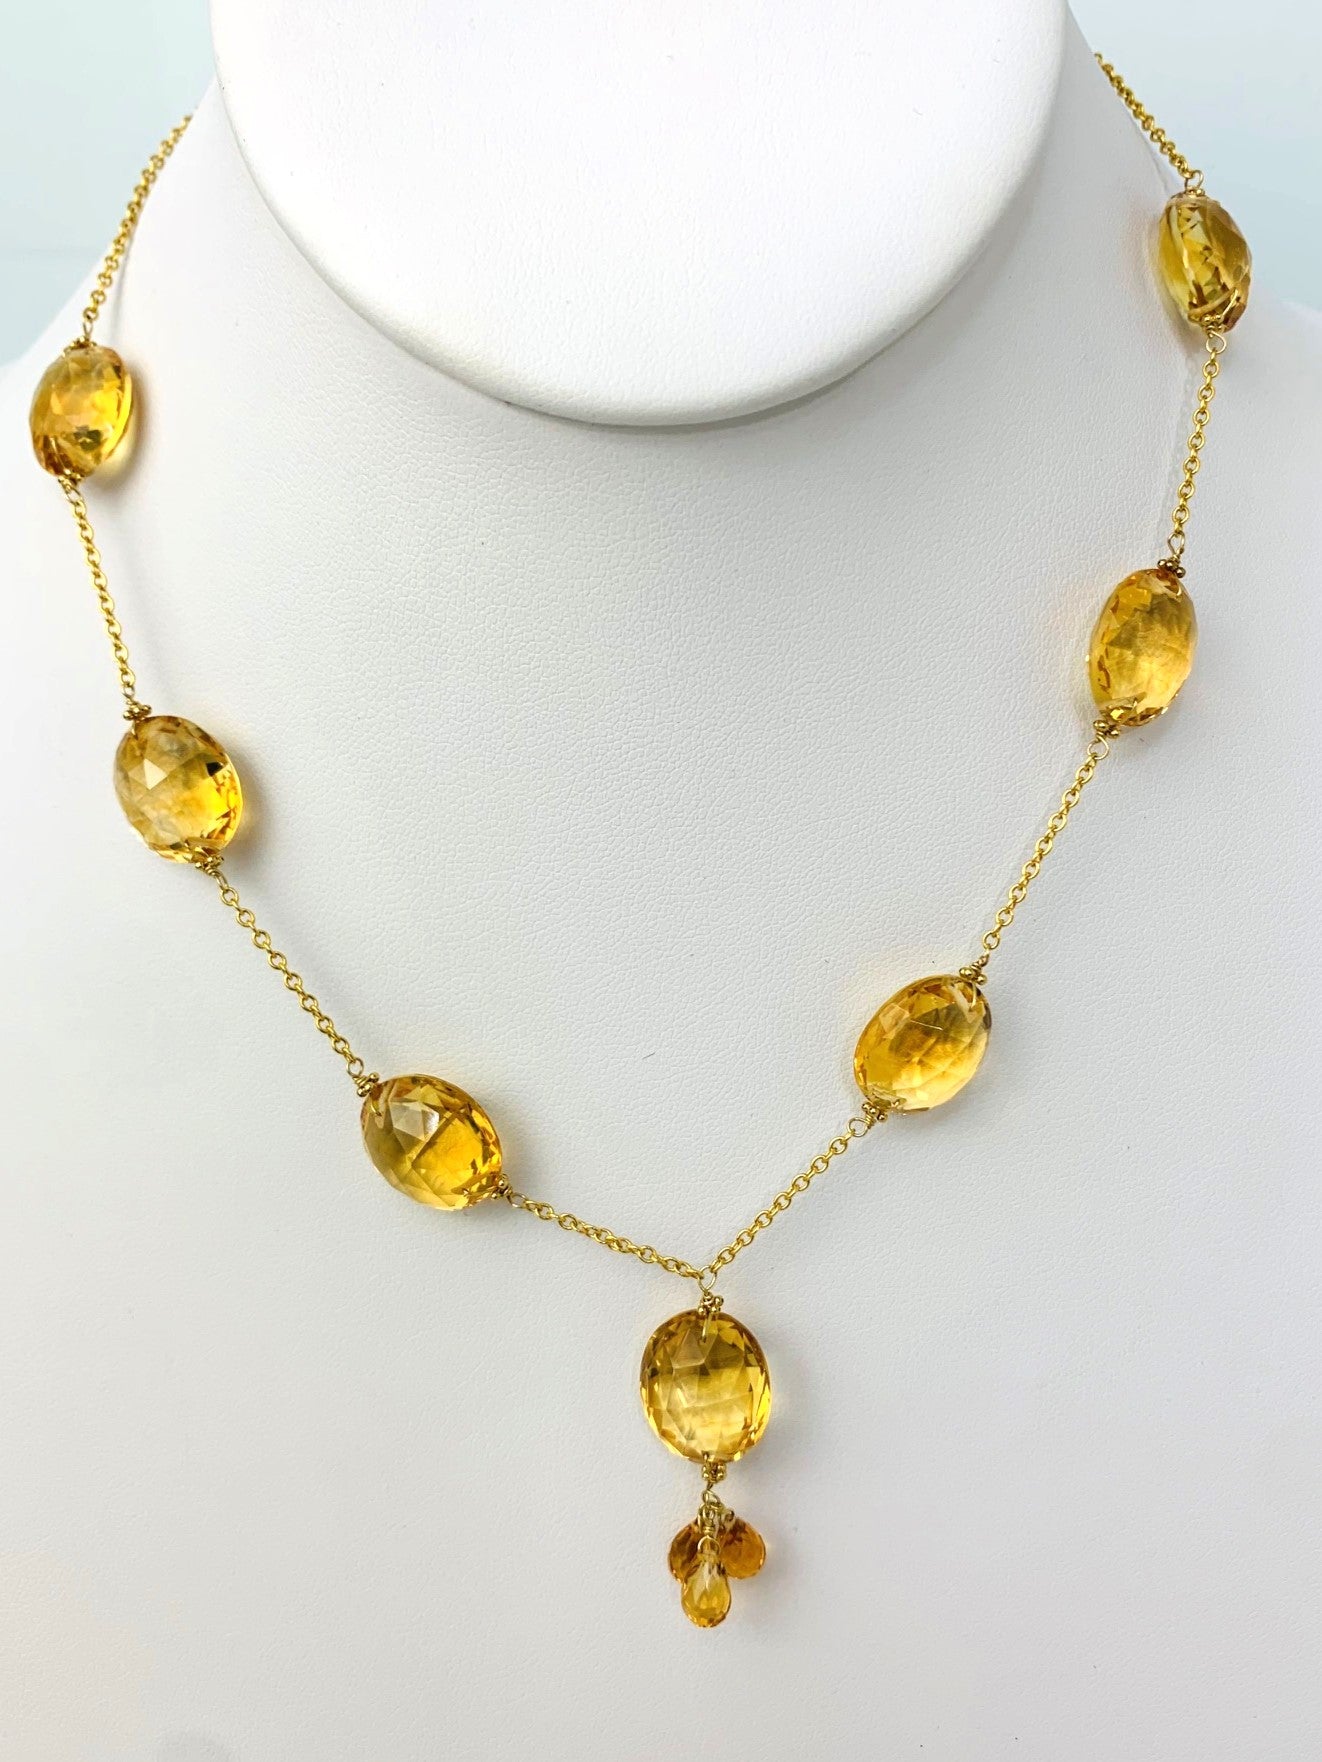 Clearance Sale! - 16-18" Citrine Station Necklace With Oval Checkerboard And 3 Briolette Tassel Drop in 14KY - NCK-374-TASTNCGM14Y-CIT-16-LG